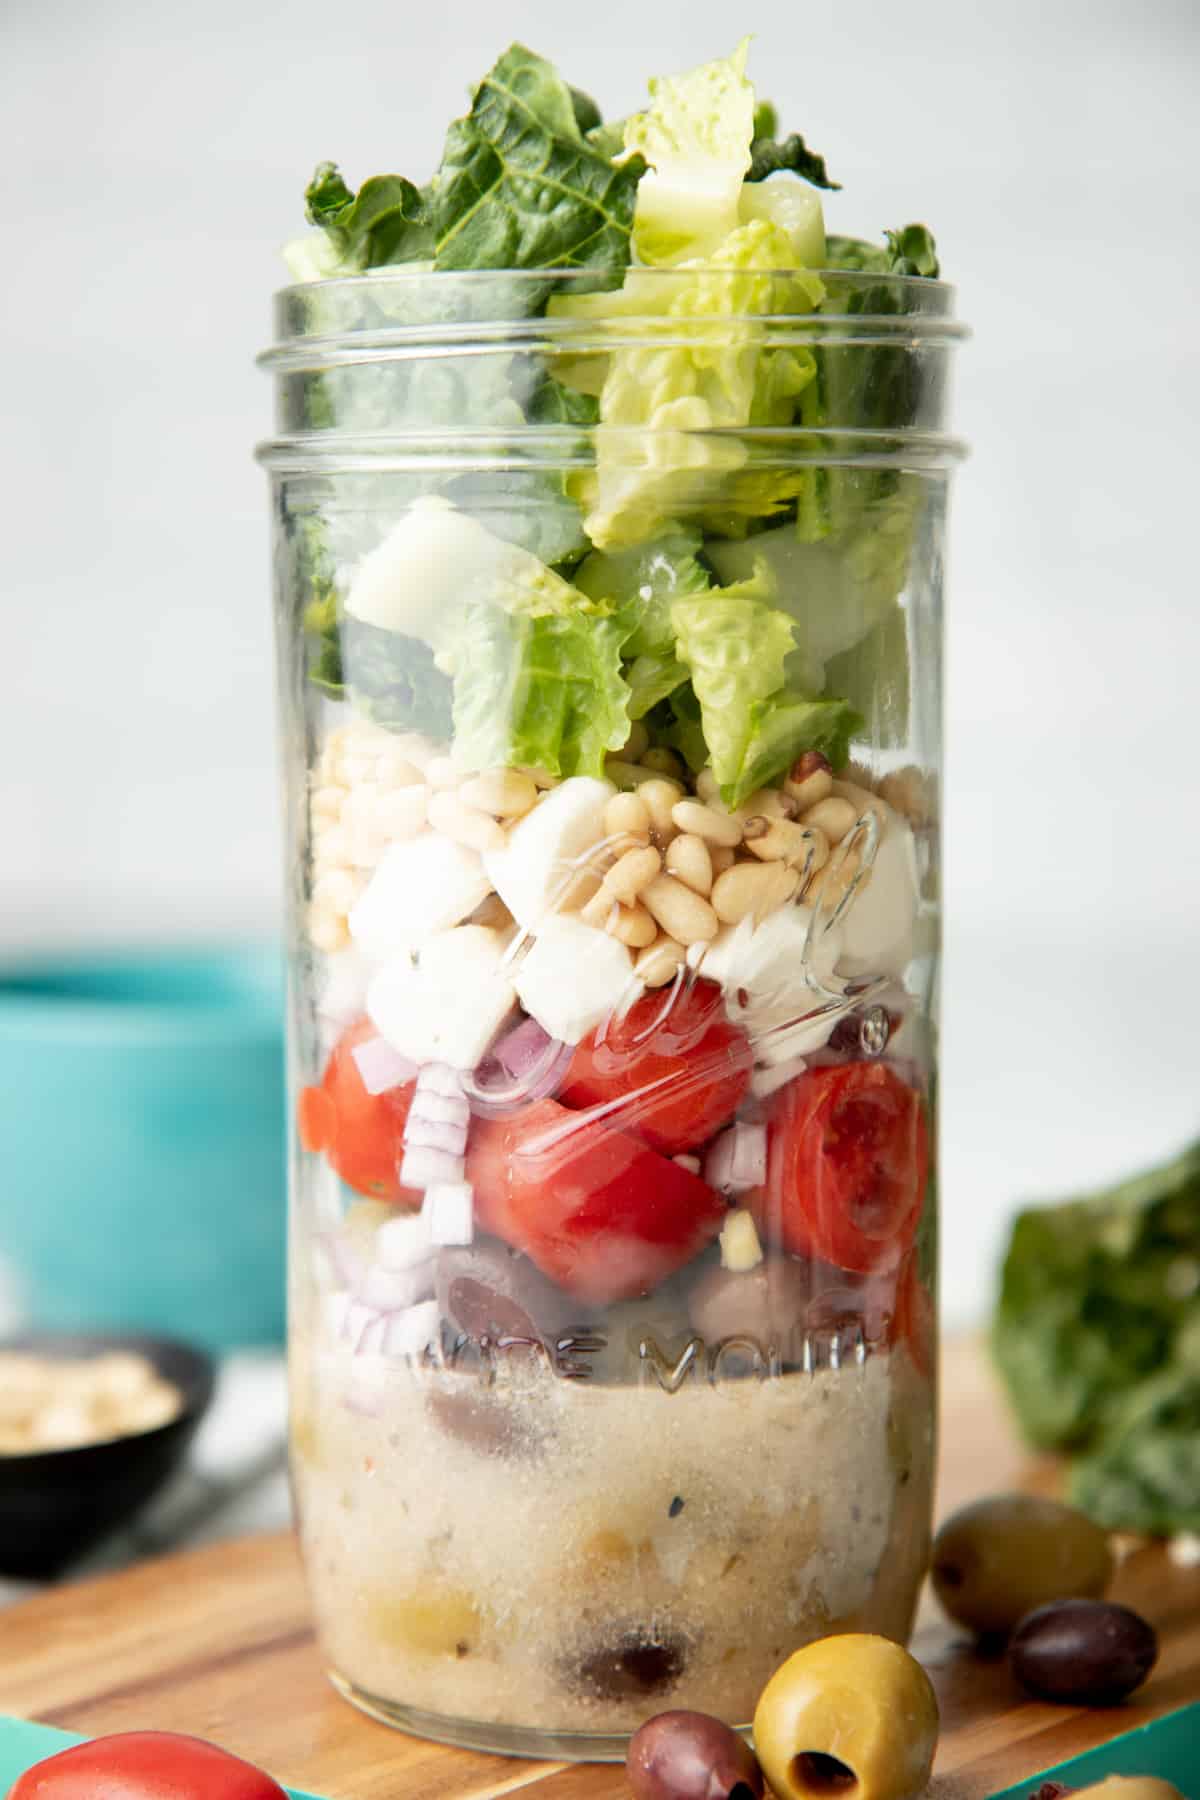 Components of an Italian chopped salad are layered in a glass mason jar.